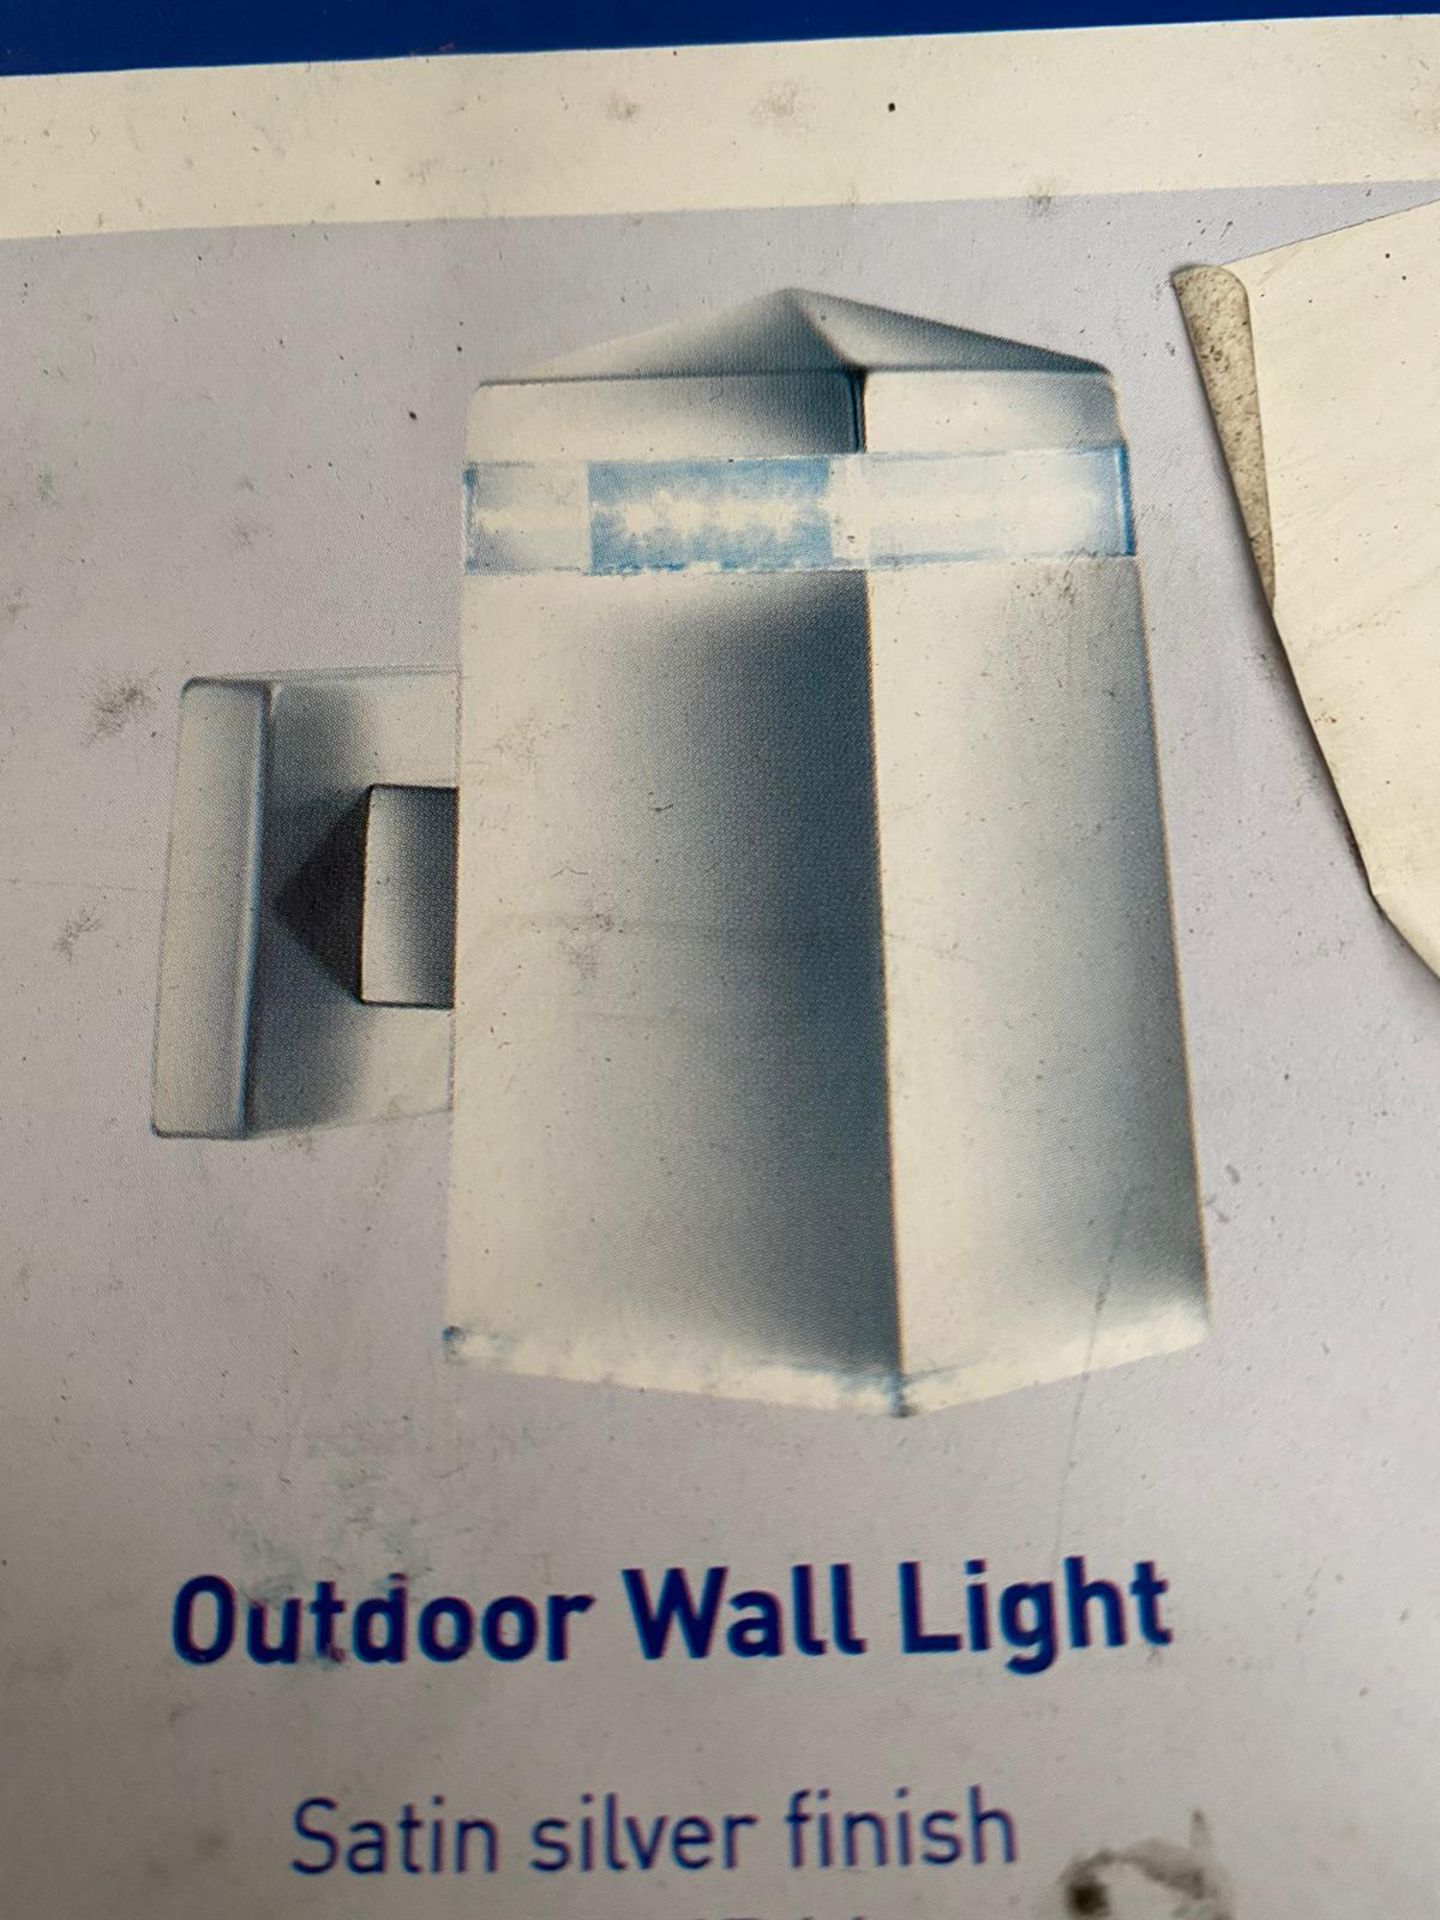 2 x Searchlight LED Outdoor Wall Light in satin silver - Ref: 7205 - New and Boxed - RRP: £80 each - Image 3 of 4